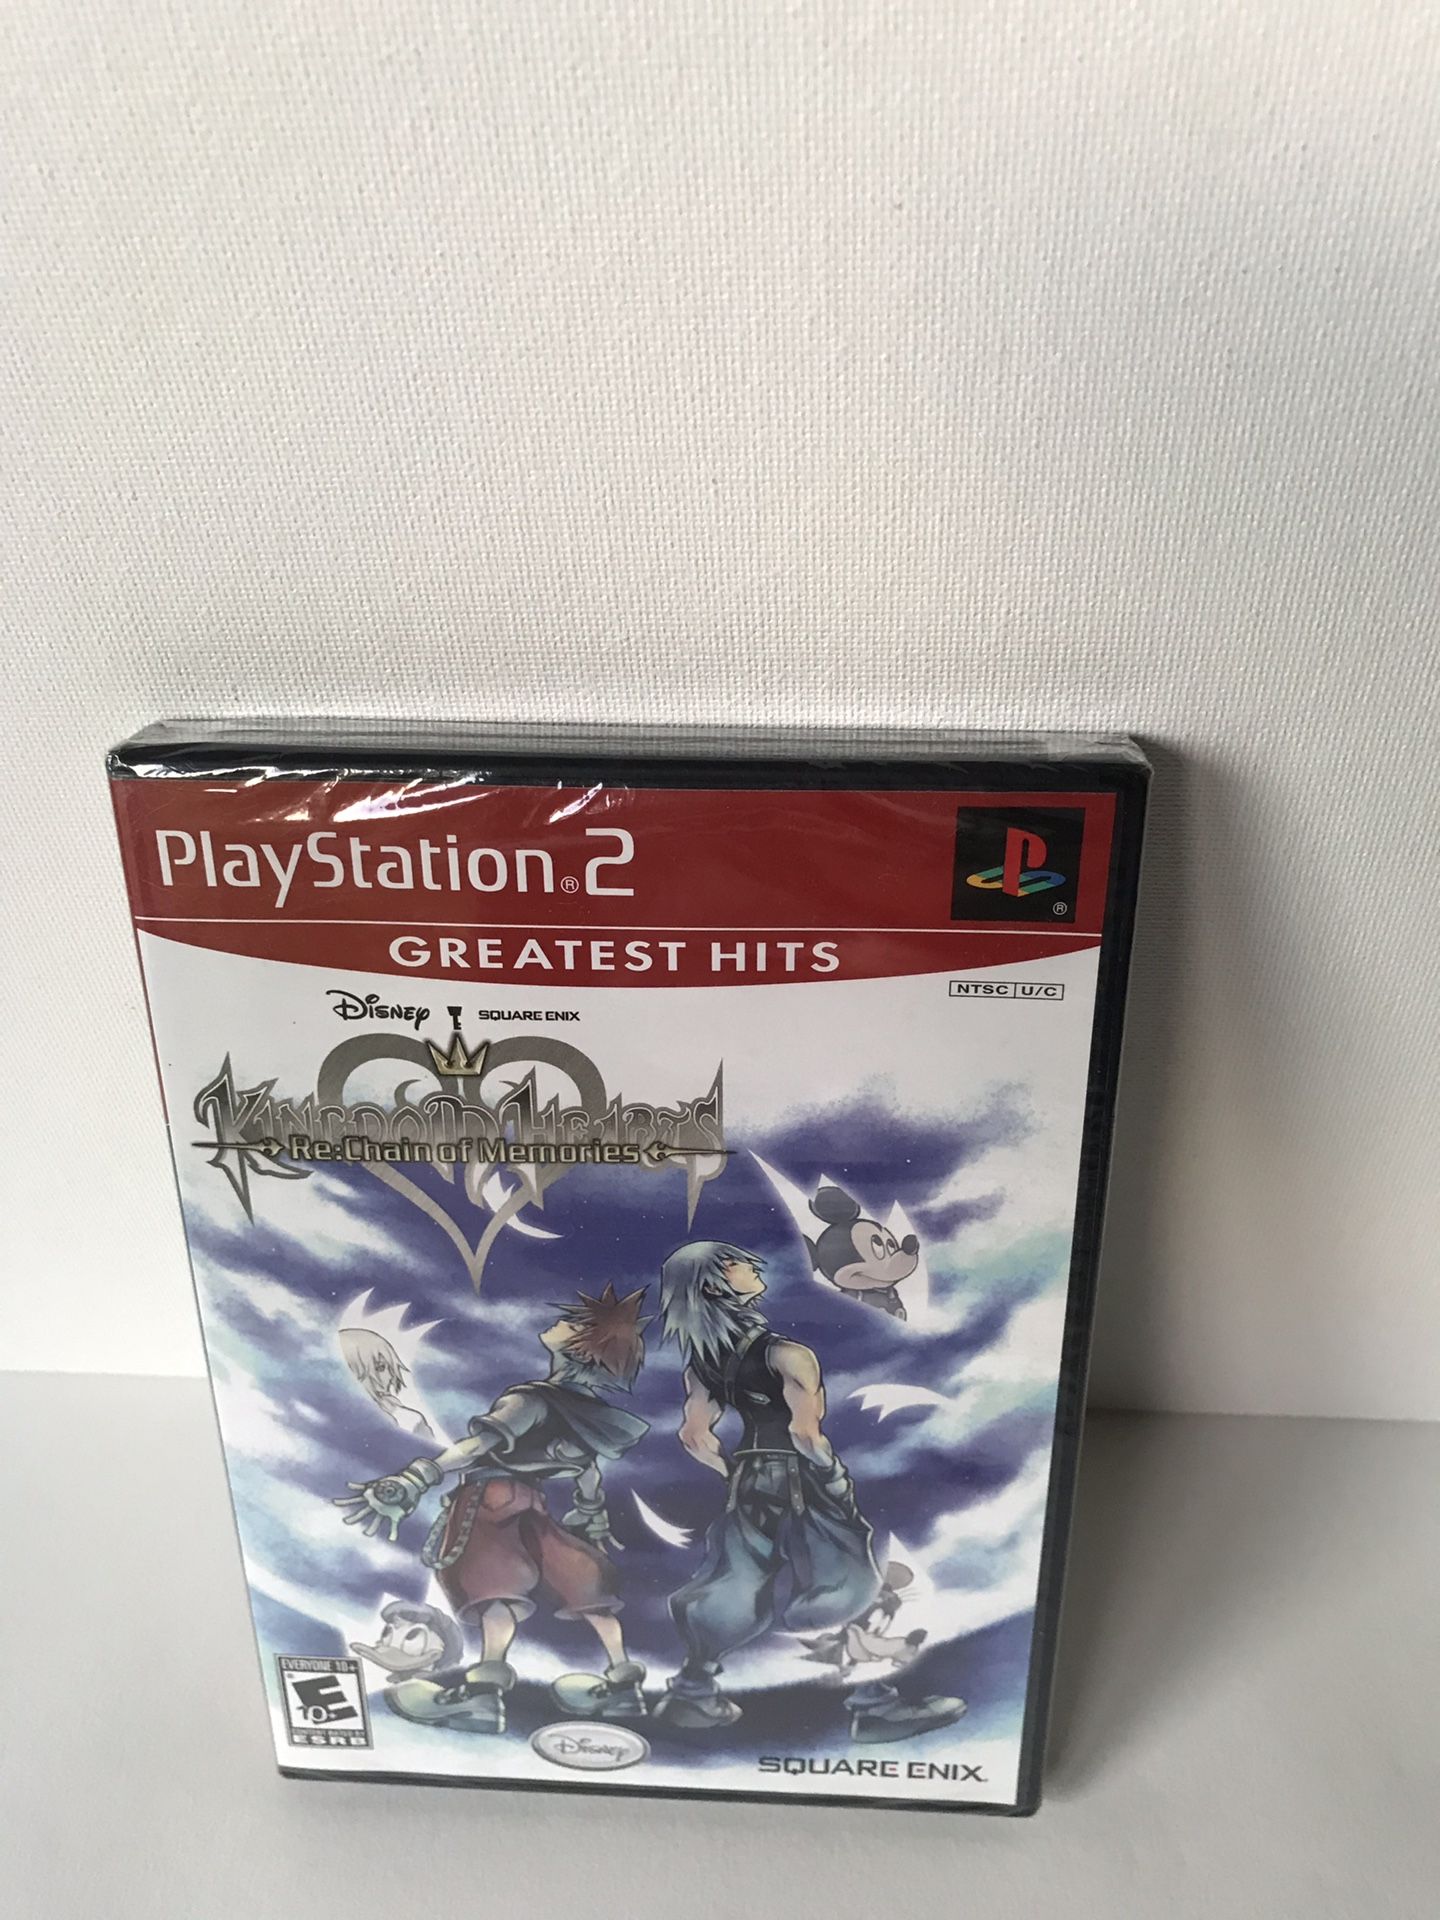 NEW!!!! Kingdom Hearts: Re:C hain of Memories Video Game (for Ps2)